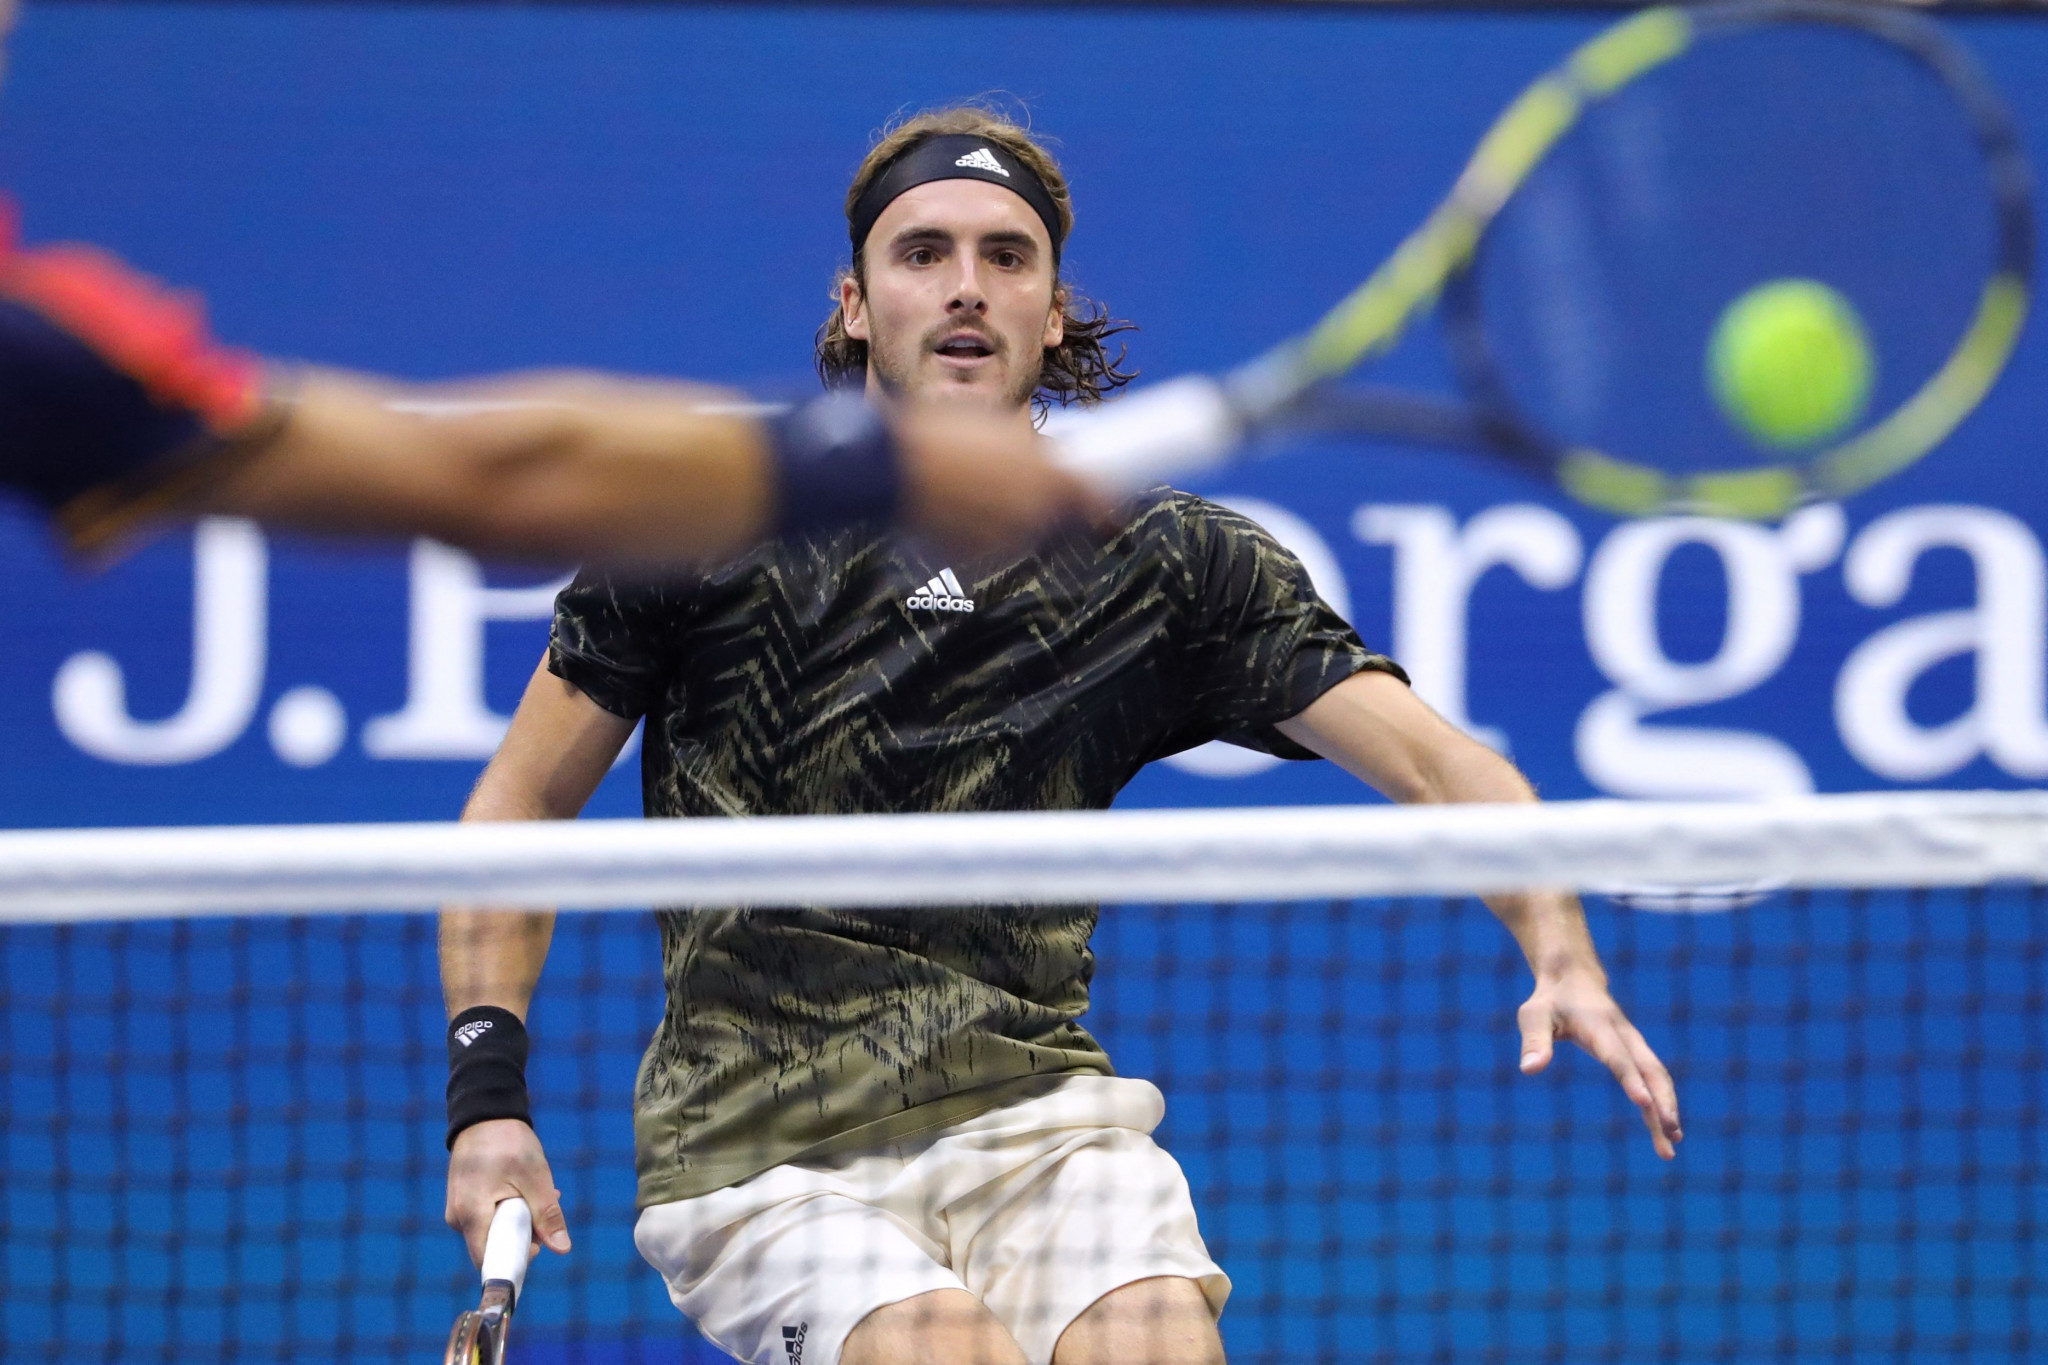 But the third seed - Stefanos Tsitsipas from Greece - is out ©Getty Images